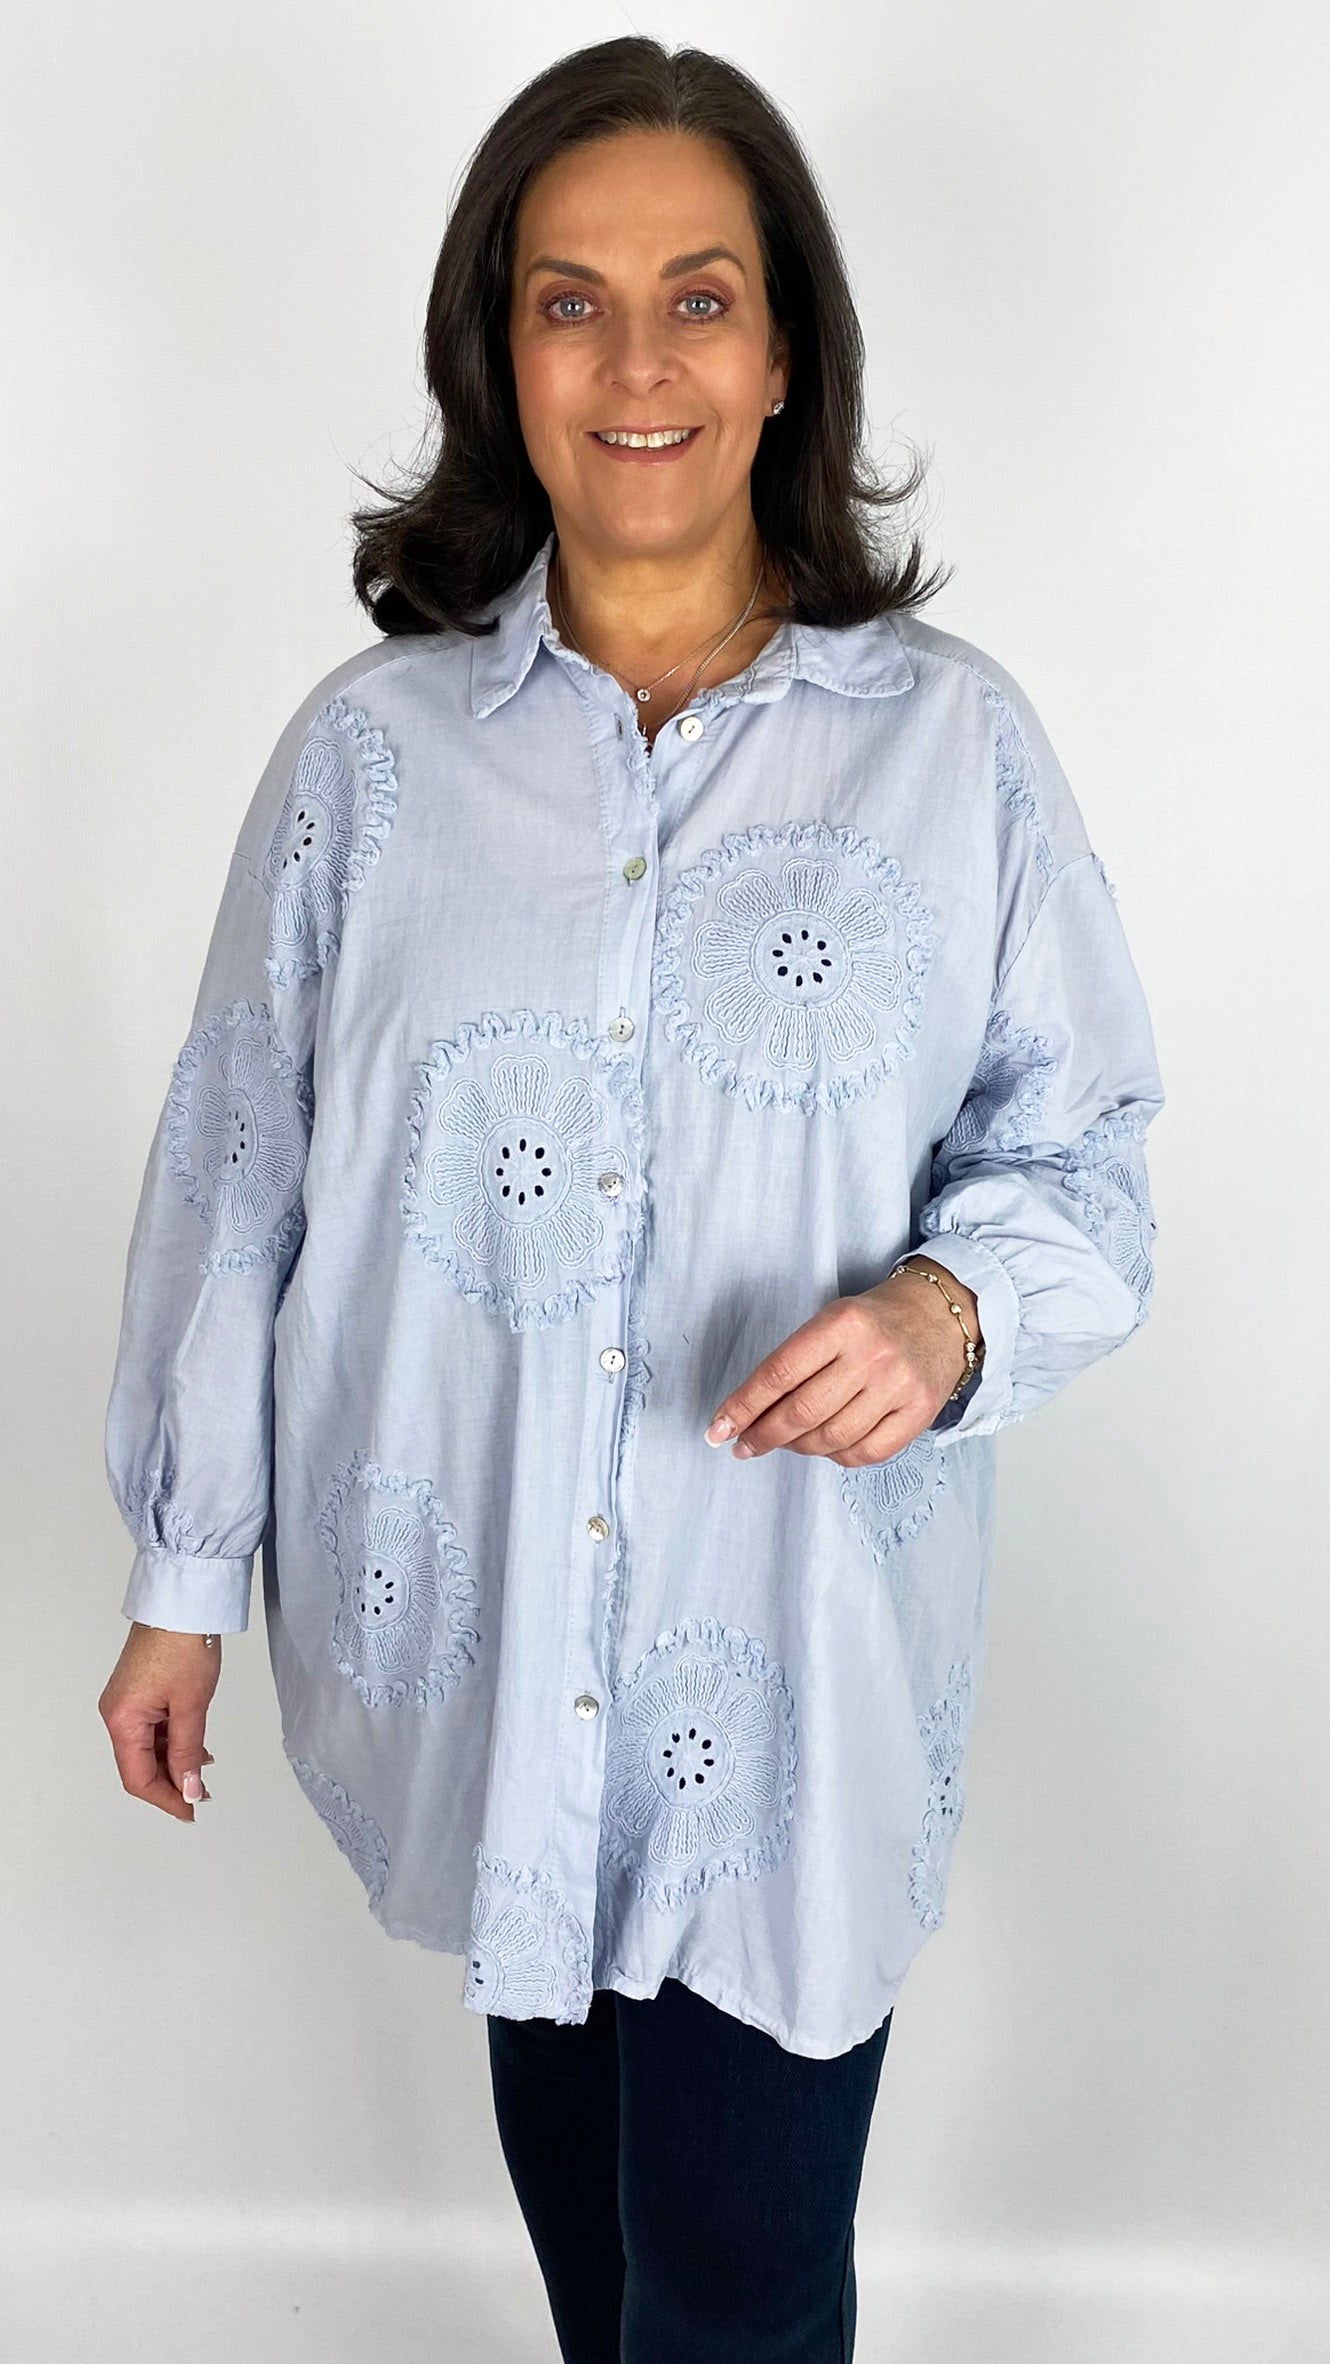 Embroidery anglaise flower design shirt (3 Colours) - last 1s